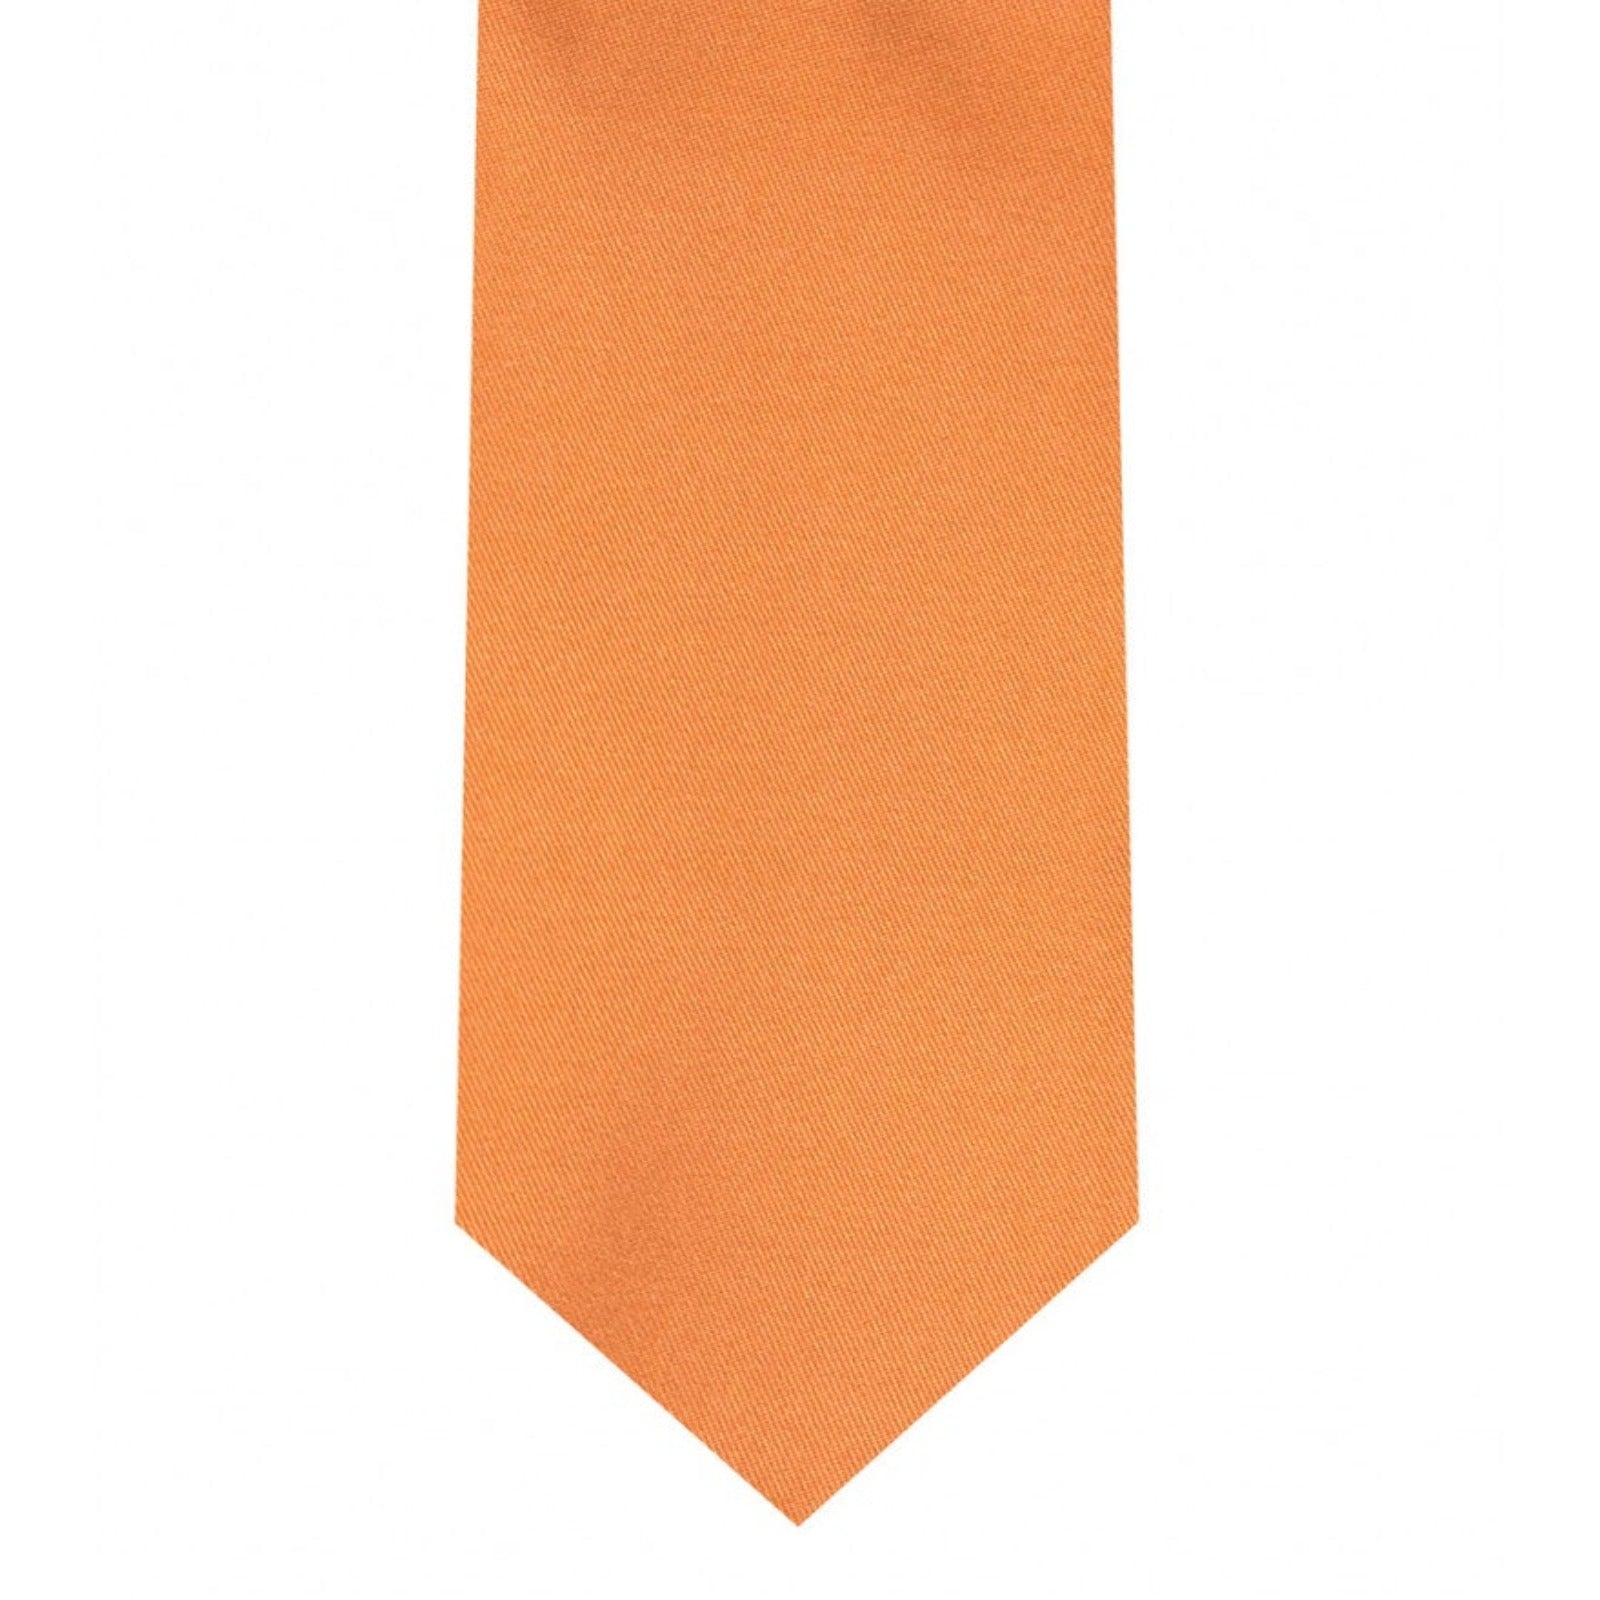 Classic Salmon Orange Tie Skinny width 2.75 inches With Matching Pocket Square | KCT Menswear